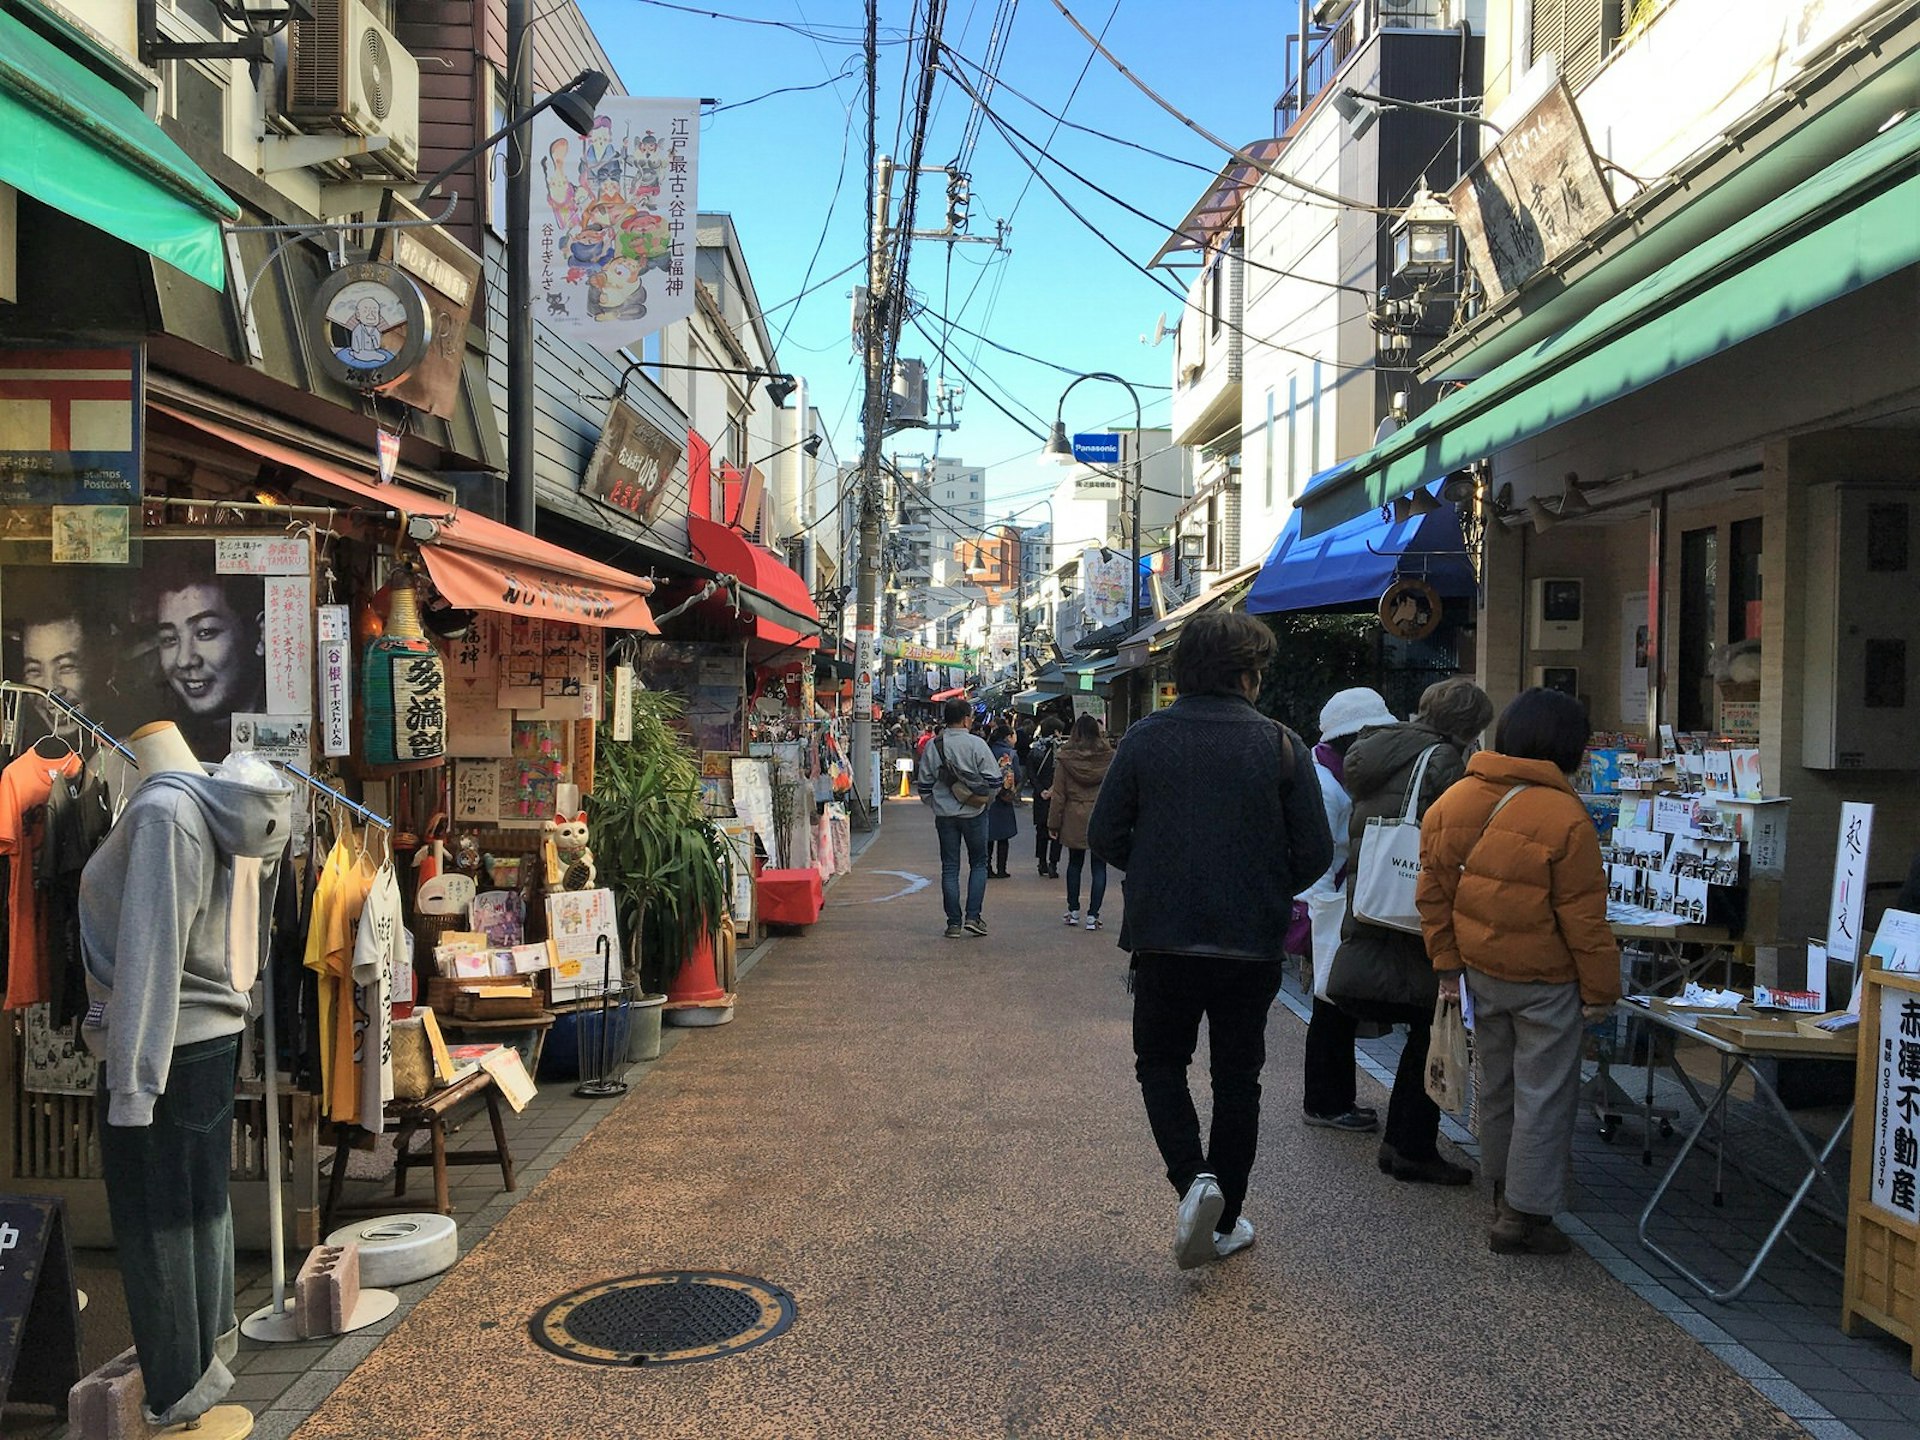 A narrow shopping street in Yanaka, where small independent stores have their wares displayed outside © Rebecca Milner / Lonely Planet